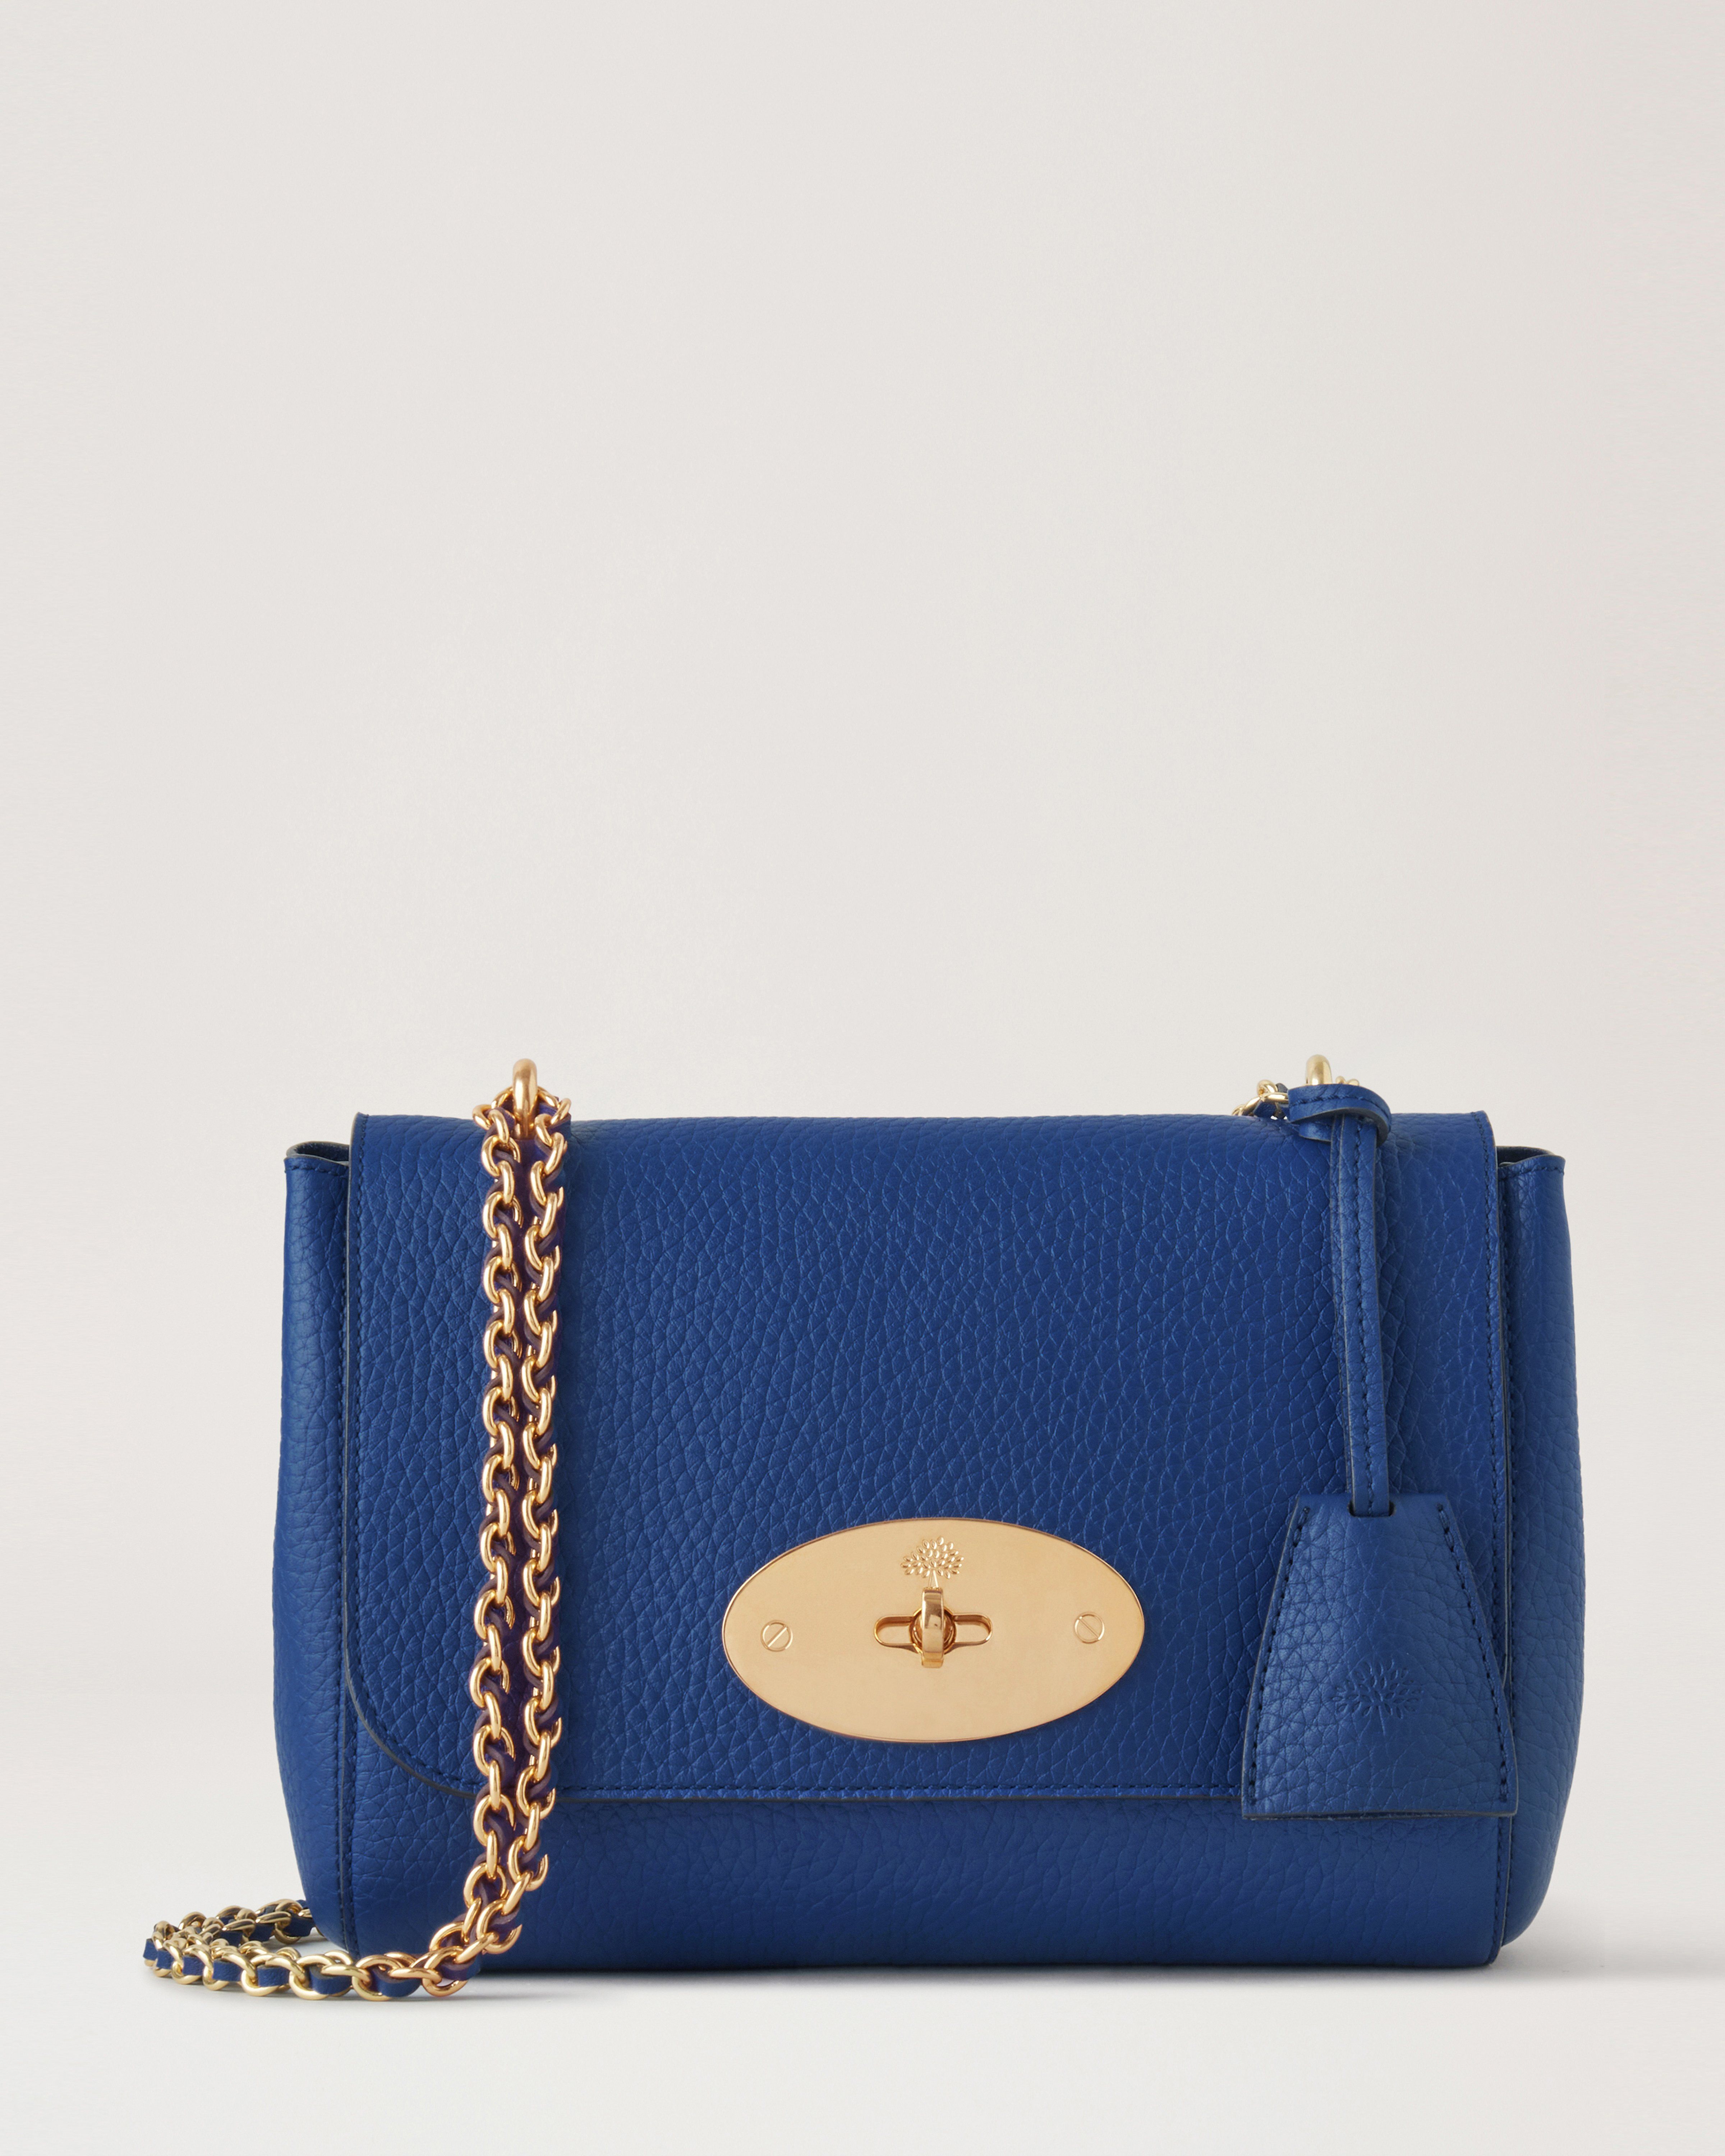 Mulberry サッチェルバッグ ブルー 新品Mulberry - mirabellor.com